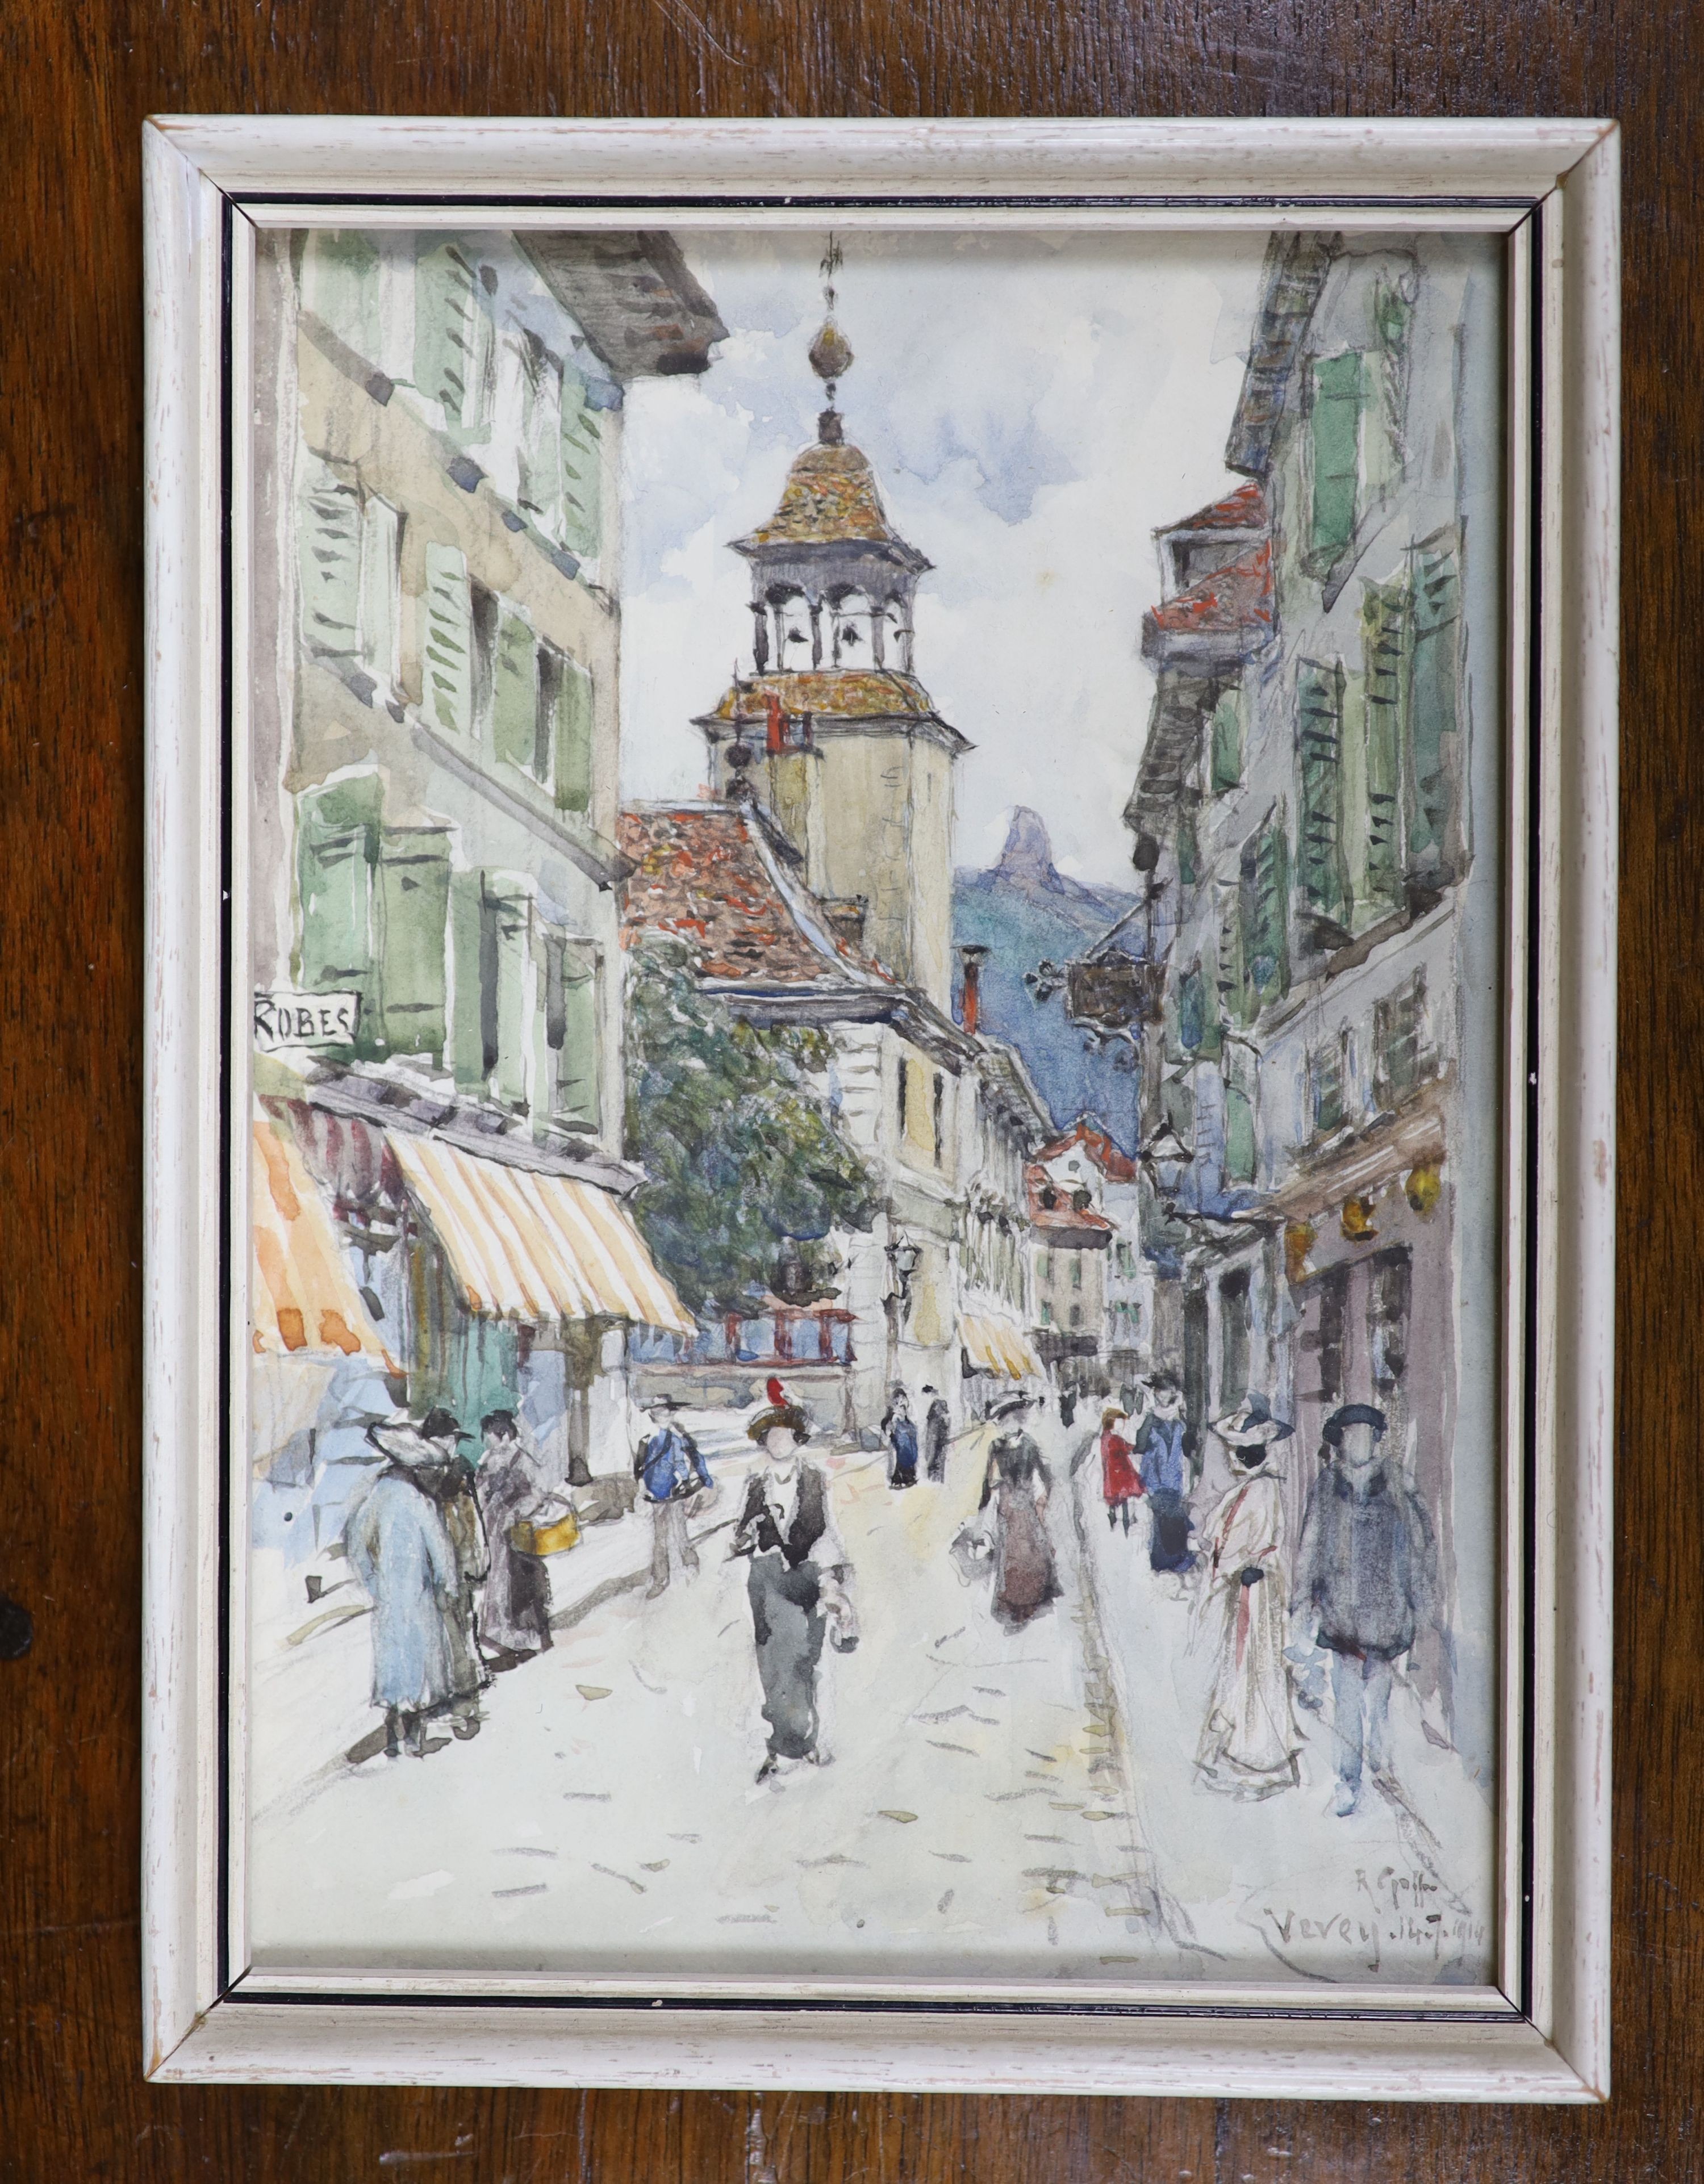 Robert Goff (1837-1922), watercolour, Vevey, signed and dated 1914, 18 x 12.5cm.